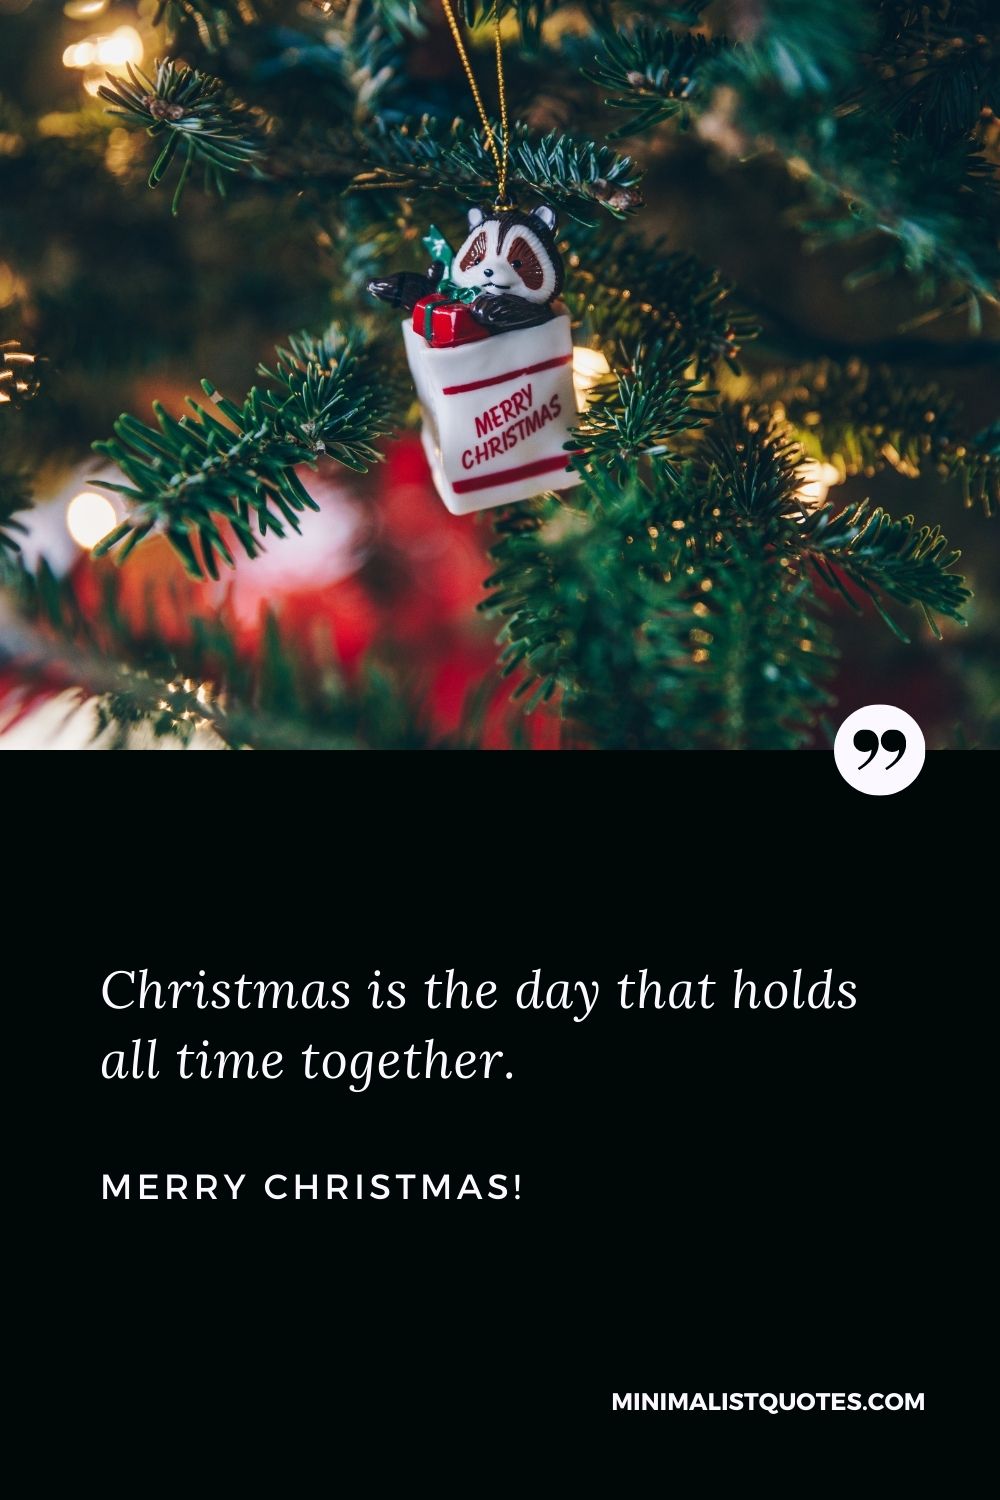 Christmas is the day that holds all time together. Merry Christmas!